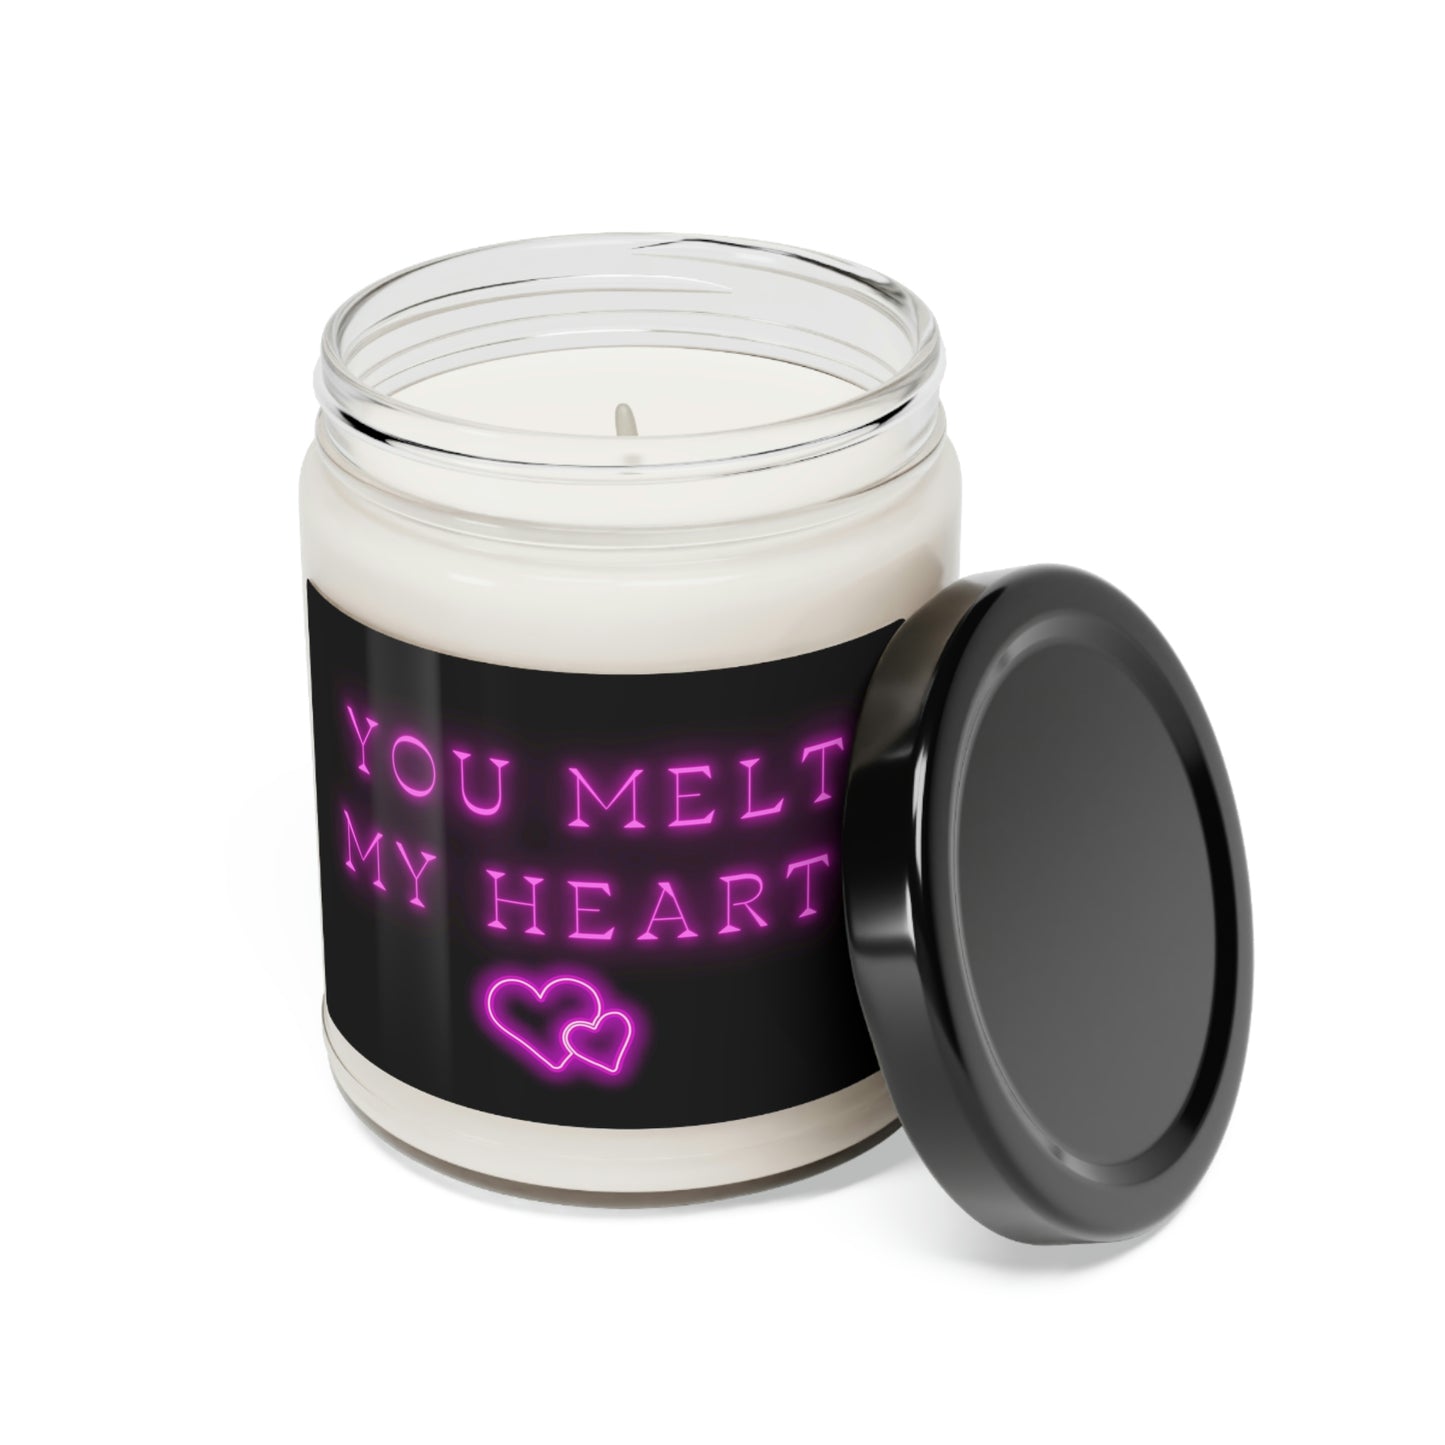 You Melt My Heart, Scented Soy Candle, 9oz, Cute Candle Pun, Valentines Day Gift